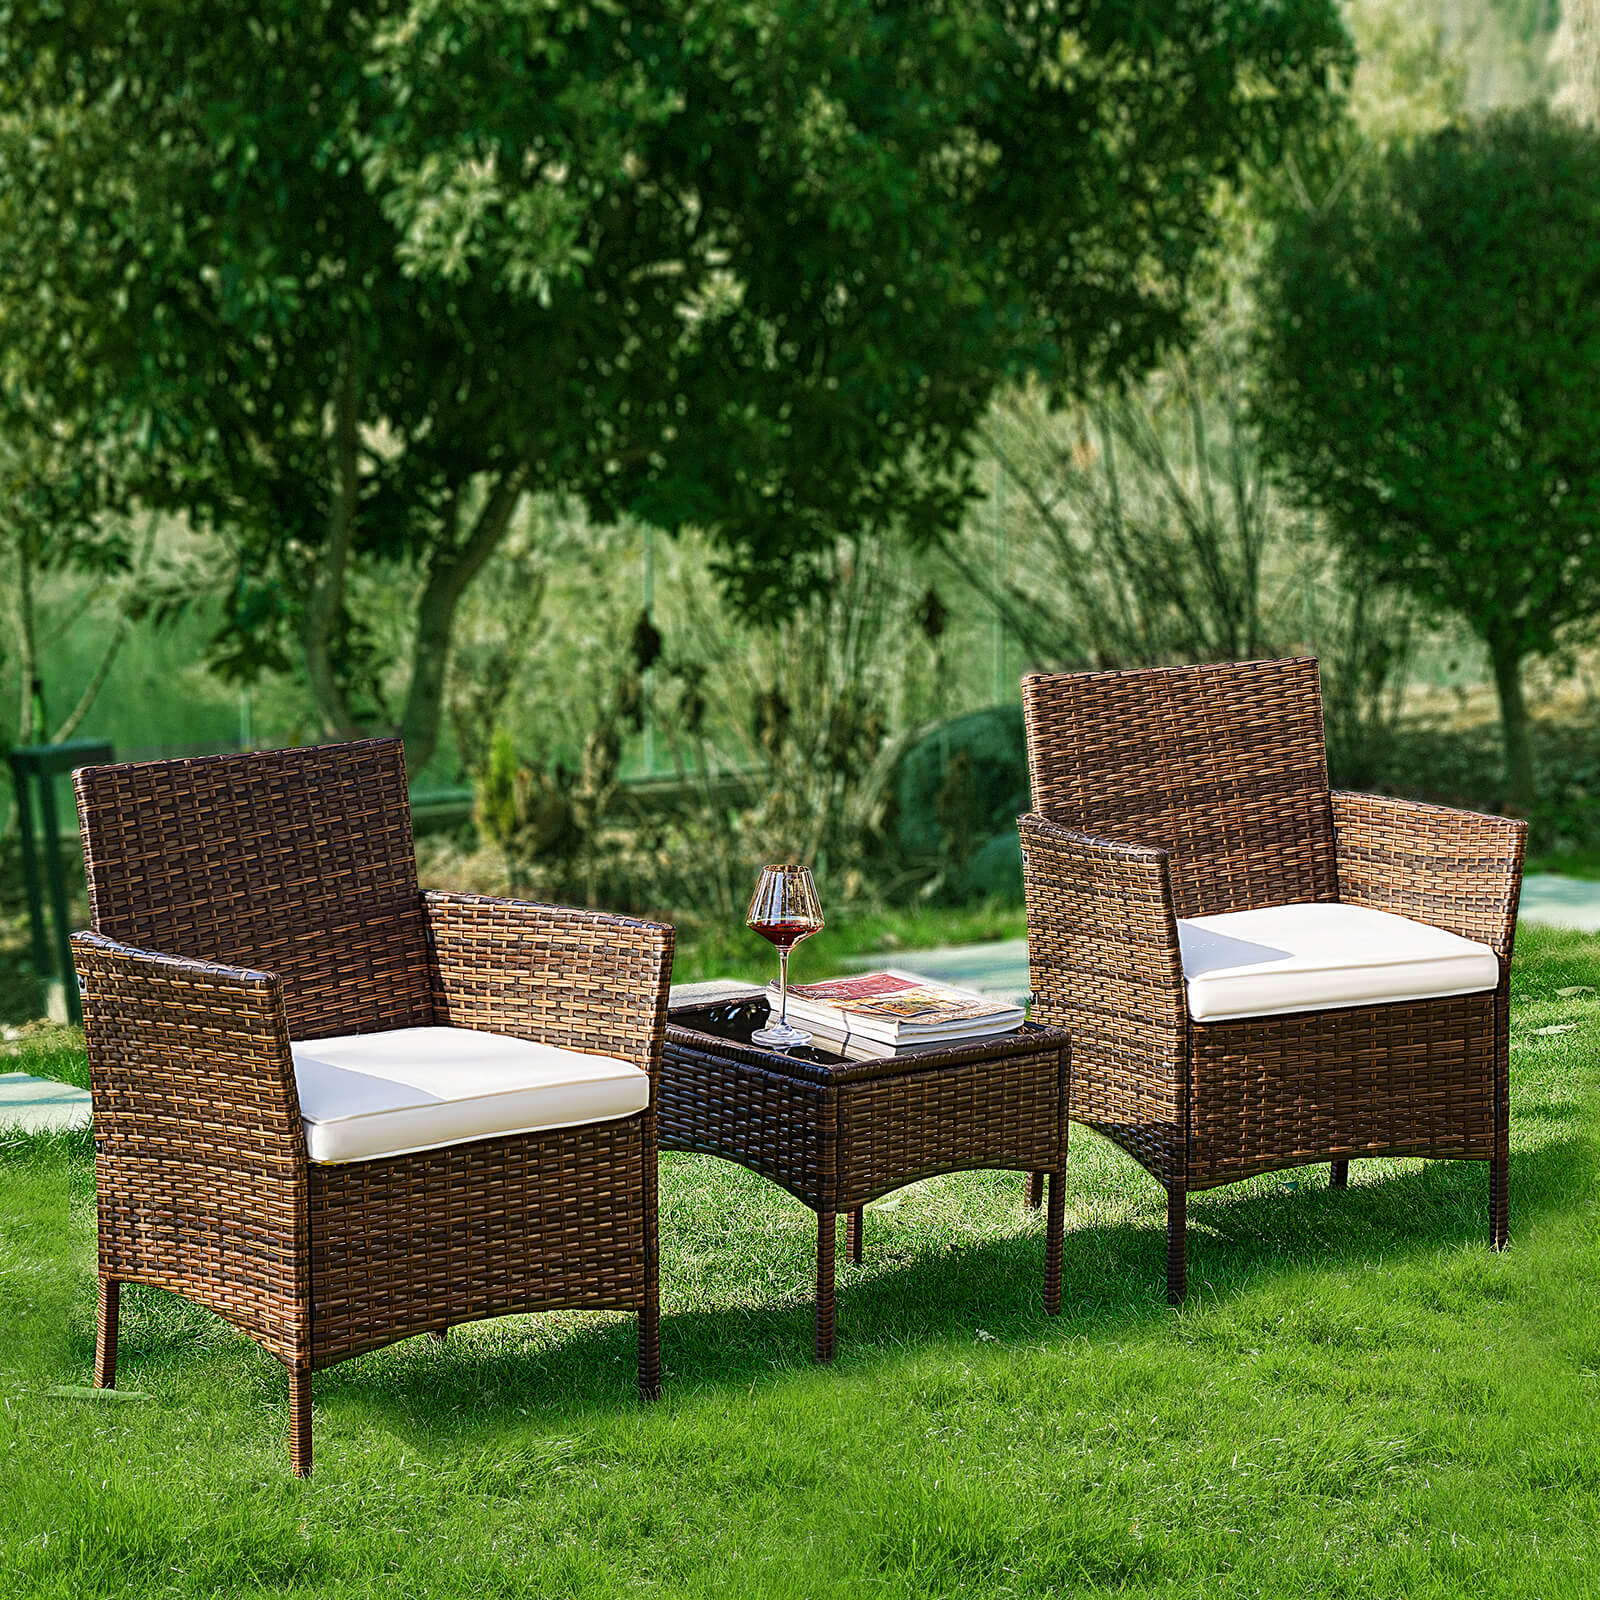 3 Piece Patio Wicker Furniture Set , Patio Chair w/ Table w/ Cushions, Simple Modern Comfort